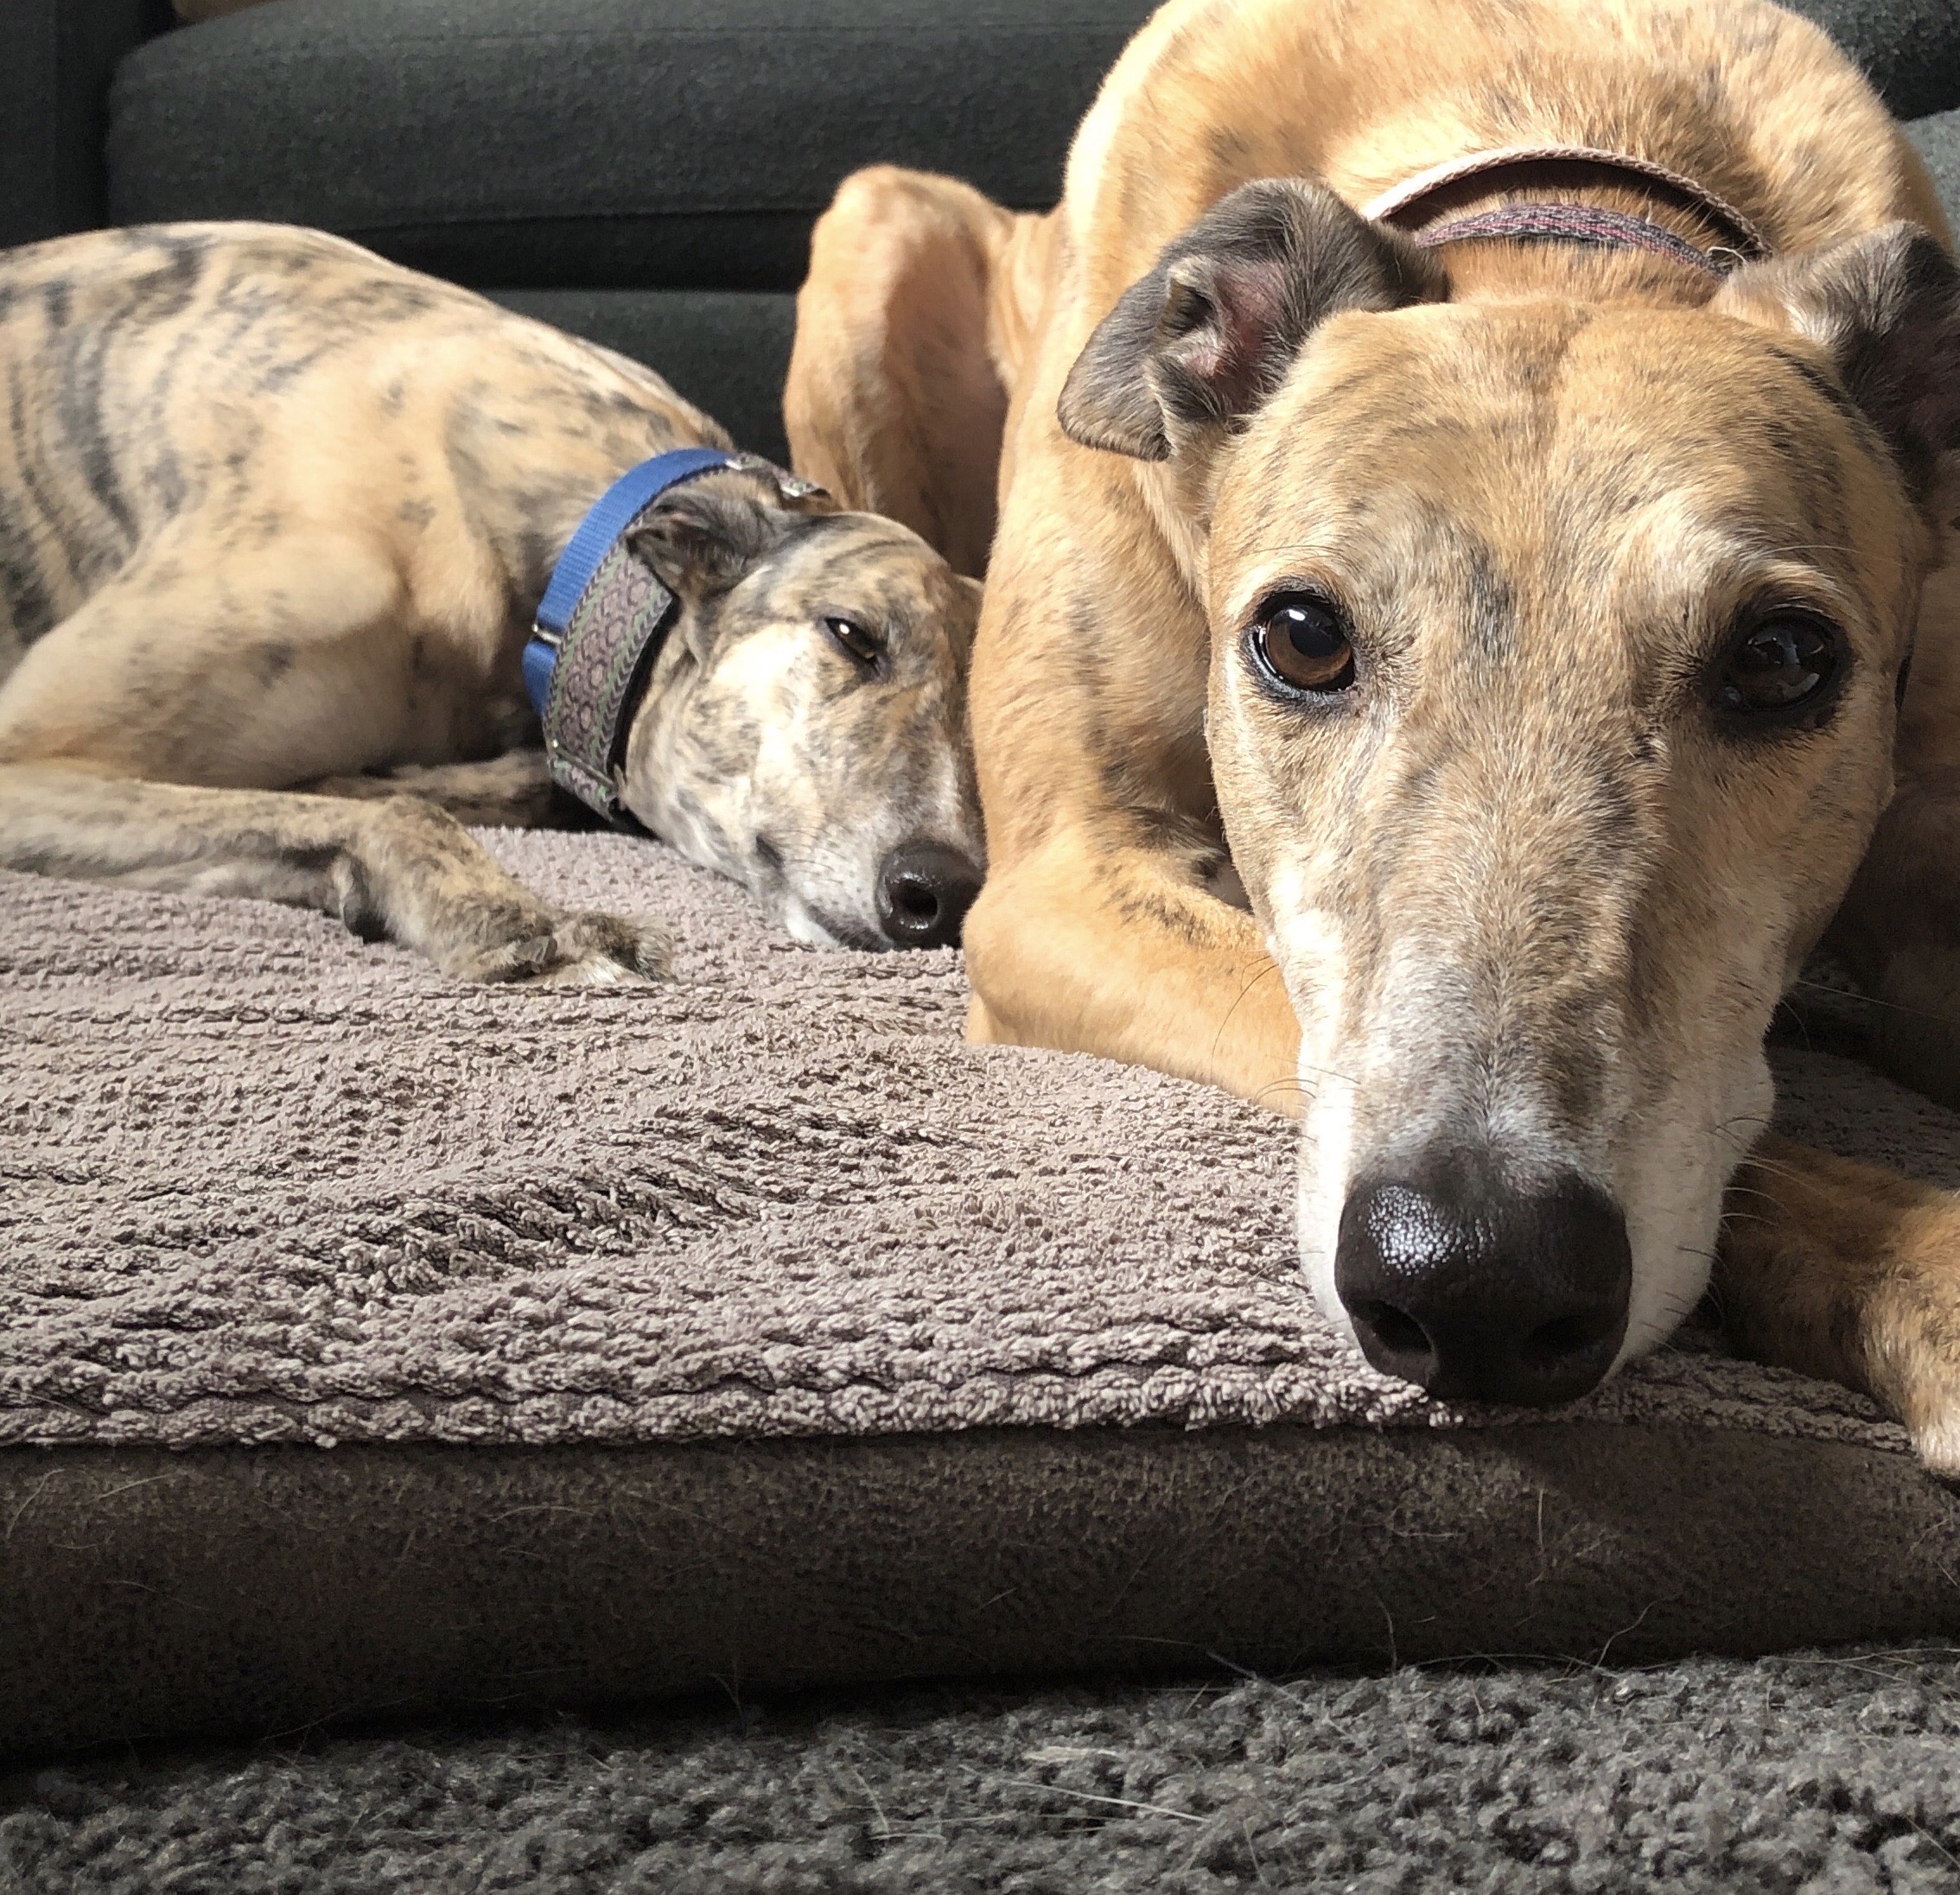 Two greyhounds resting on a blanket on the floor